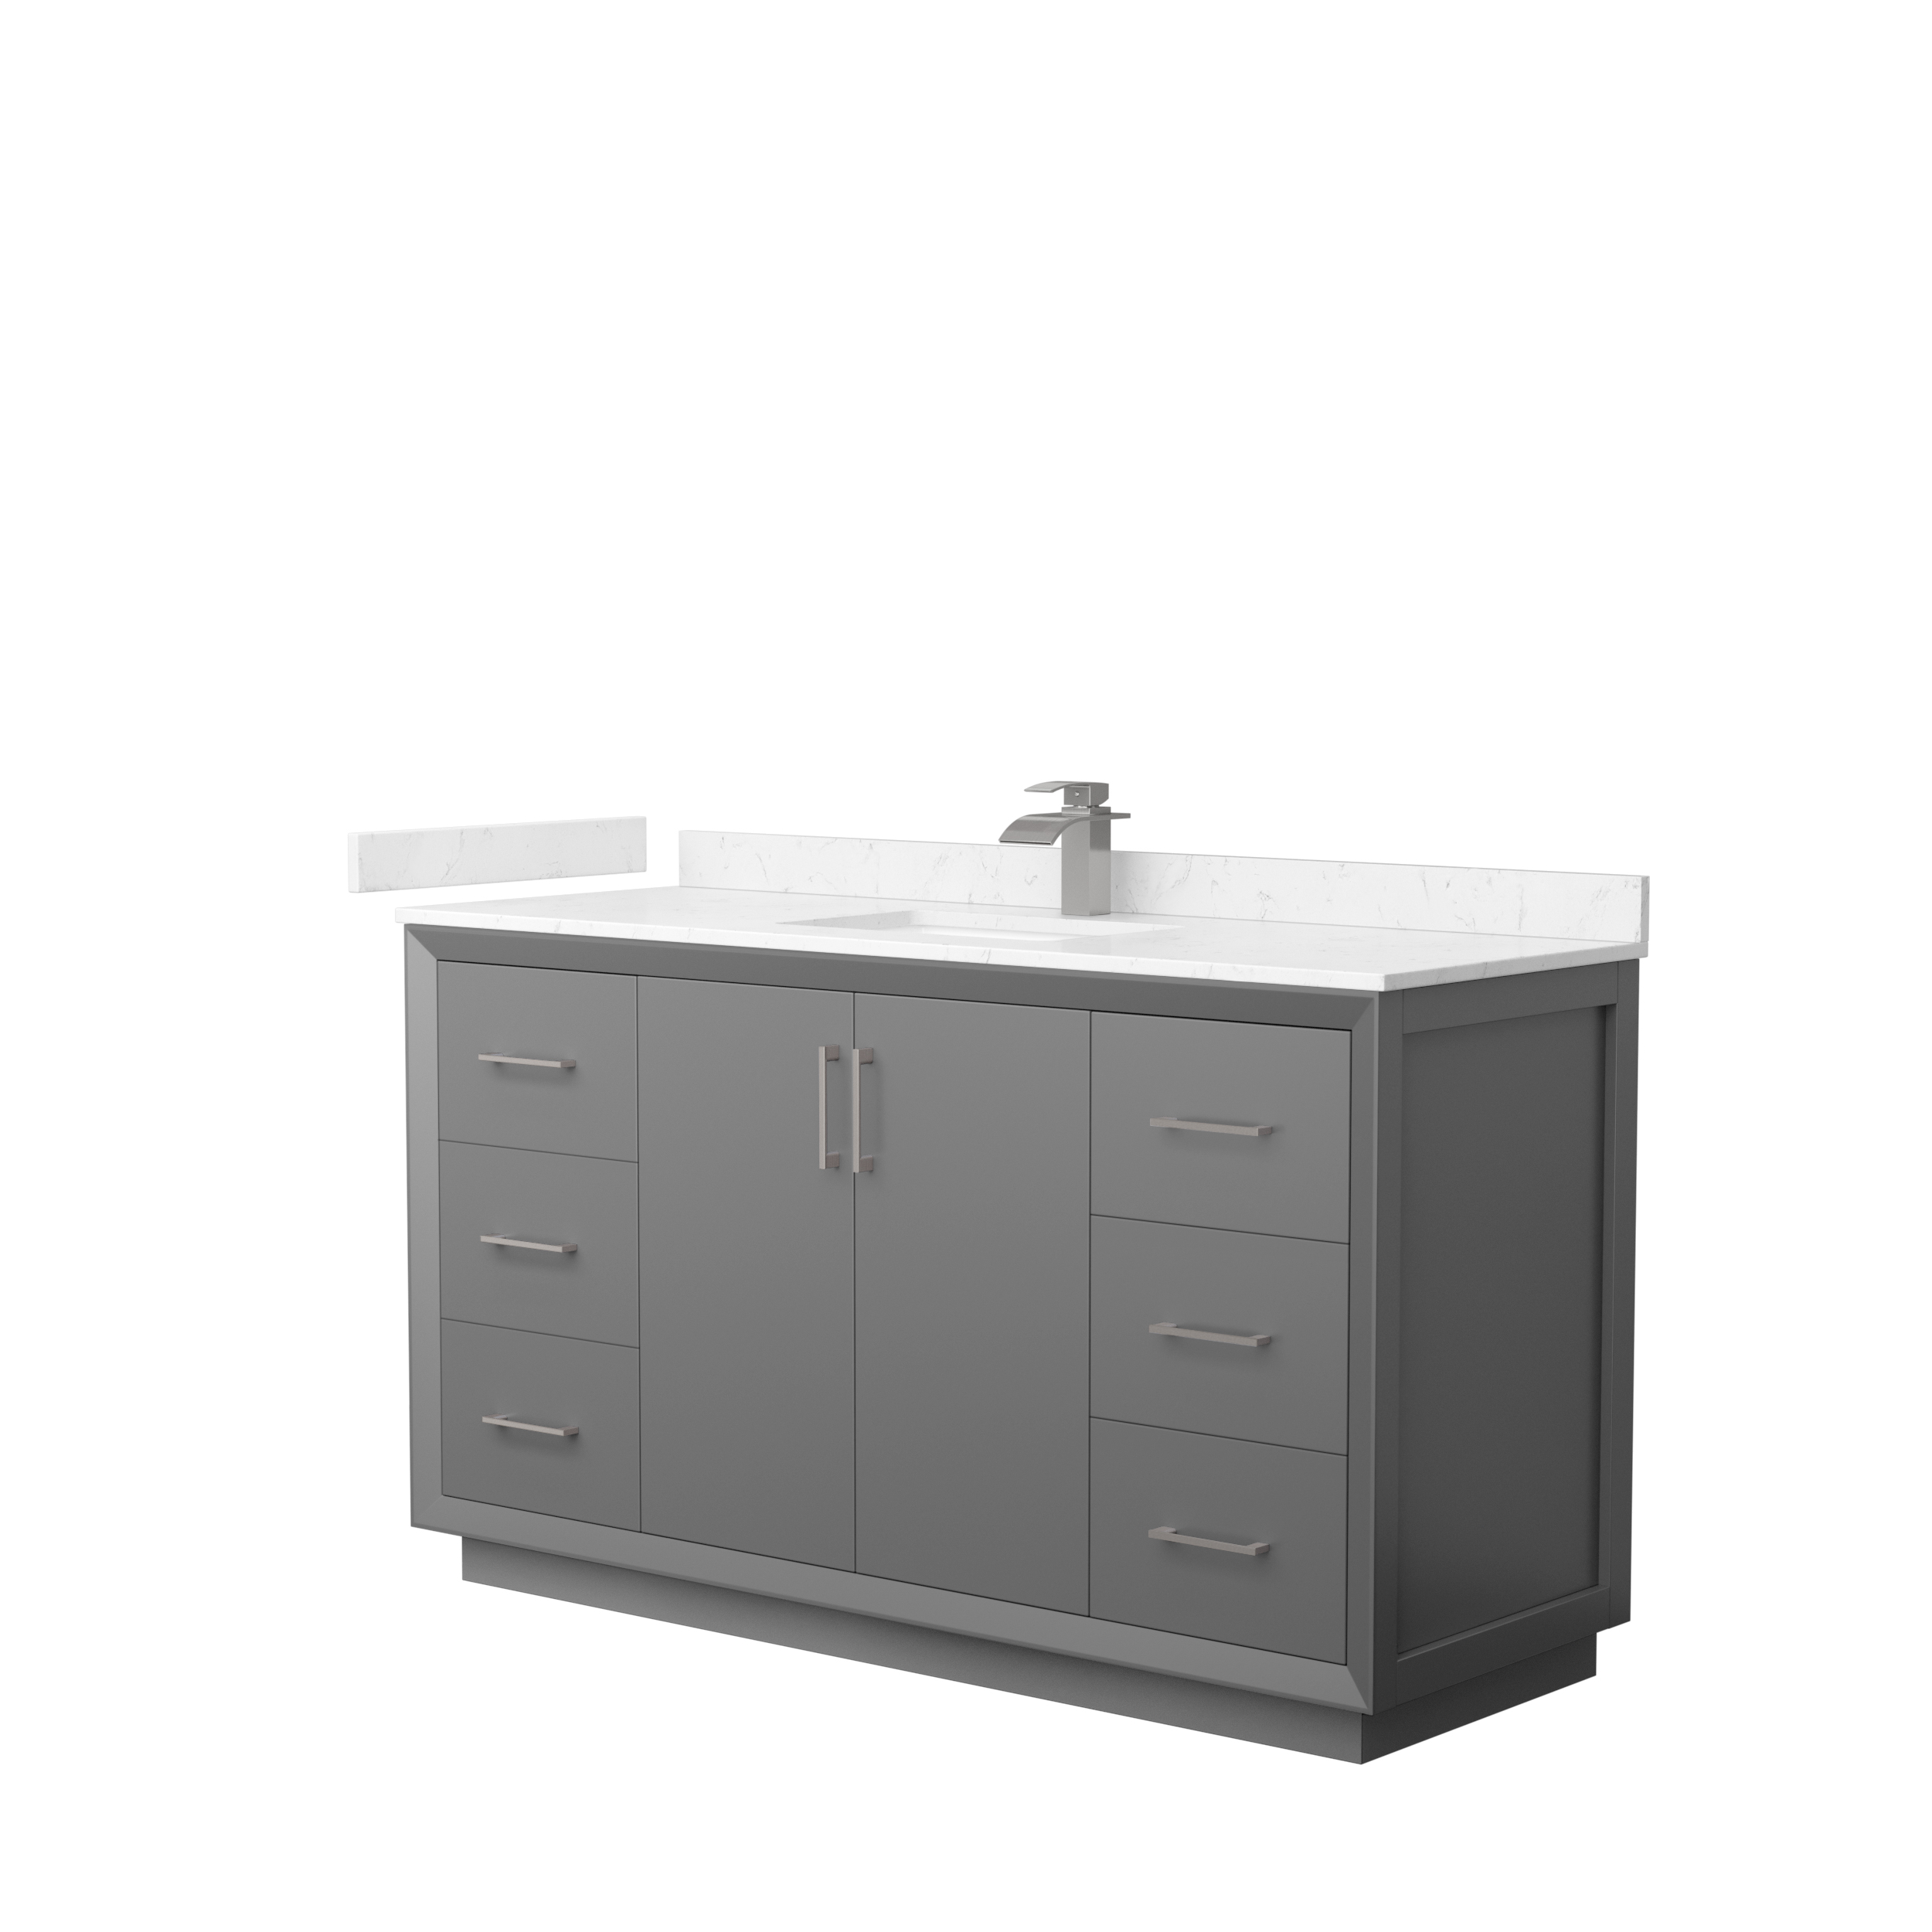 60" Single Bathroom Vanity With 3 Color Options, 4 Countertop Options, 3 Hardware Options, And 2 Mirror Options